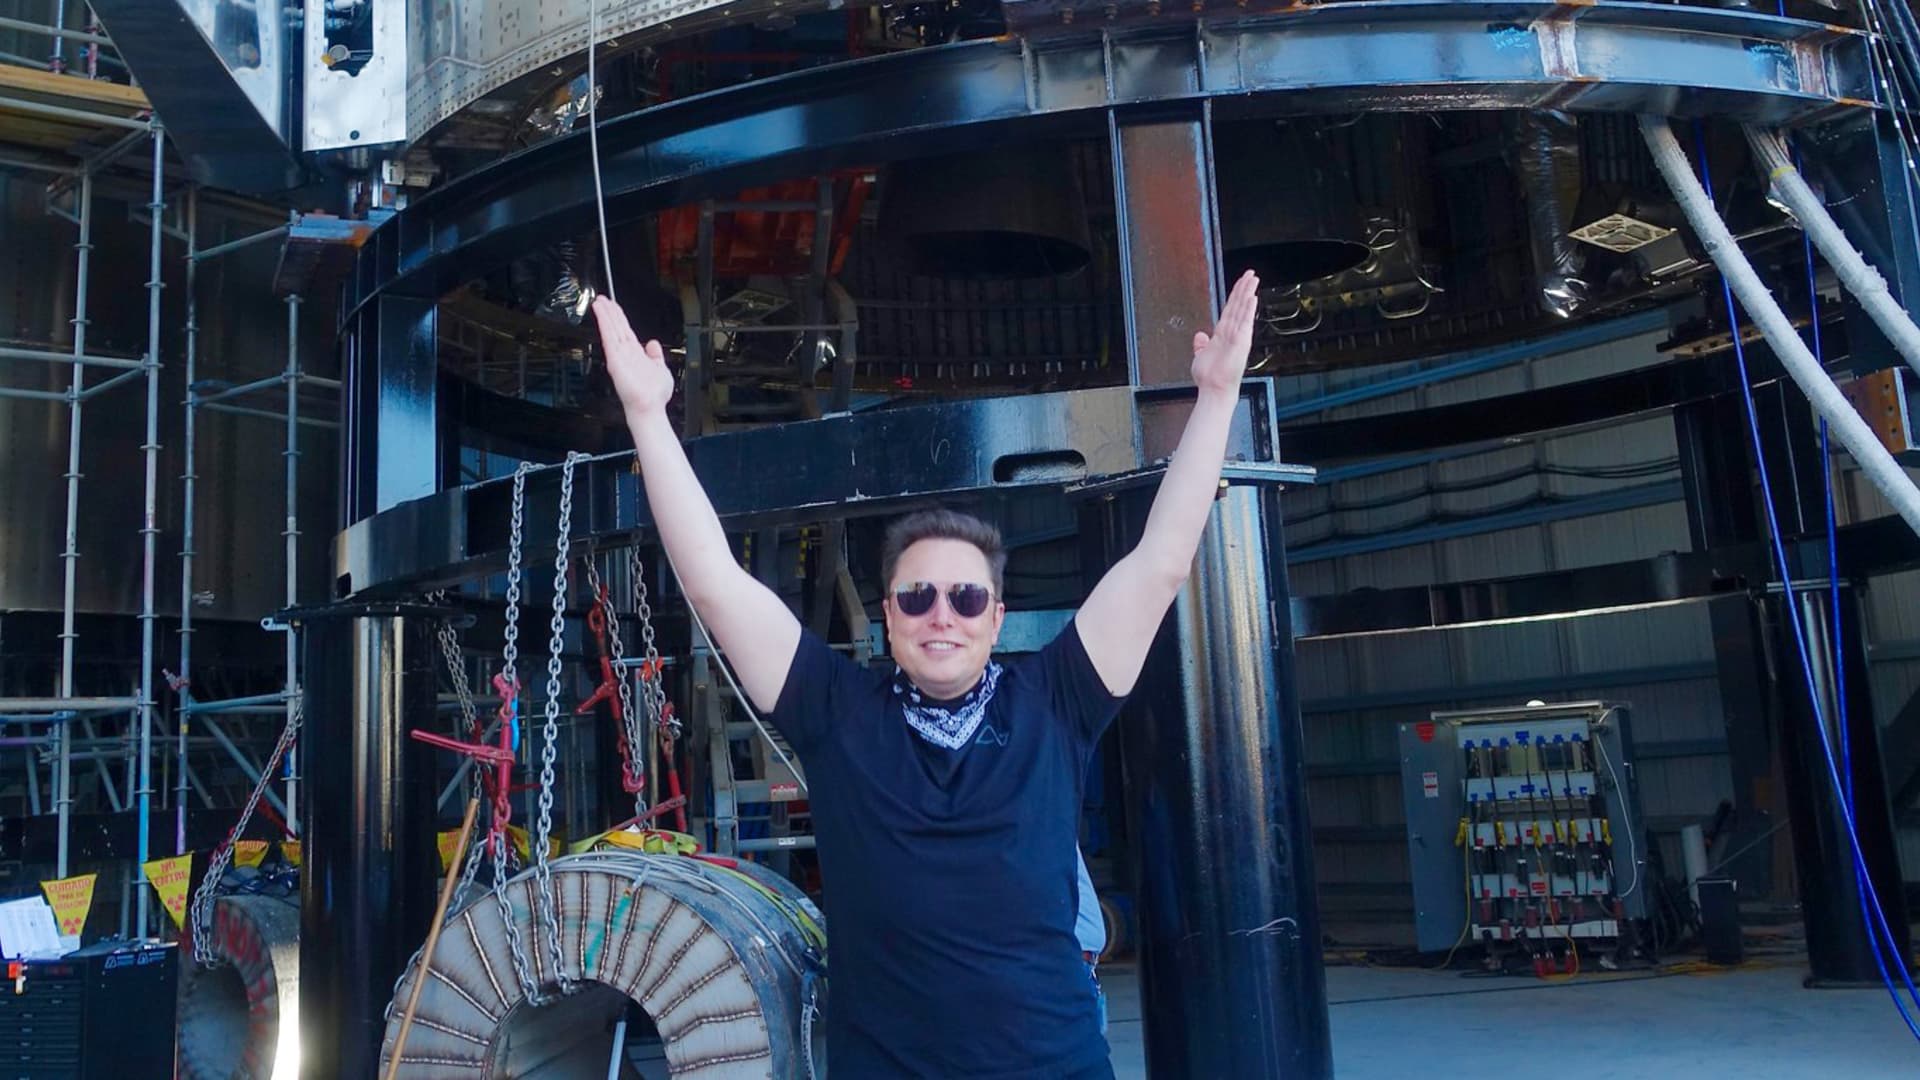 SpaceX CEO Elon Musk raises his arms in celebration beneath a Starship rocket prototype under construction in Boca Chica, Texas.